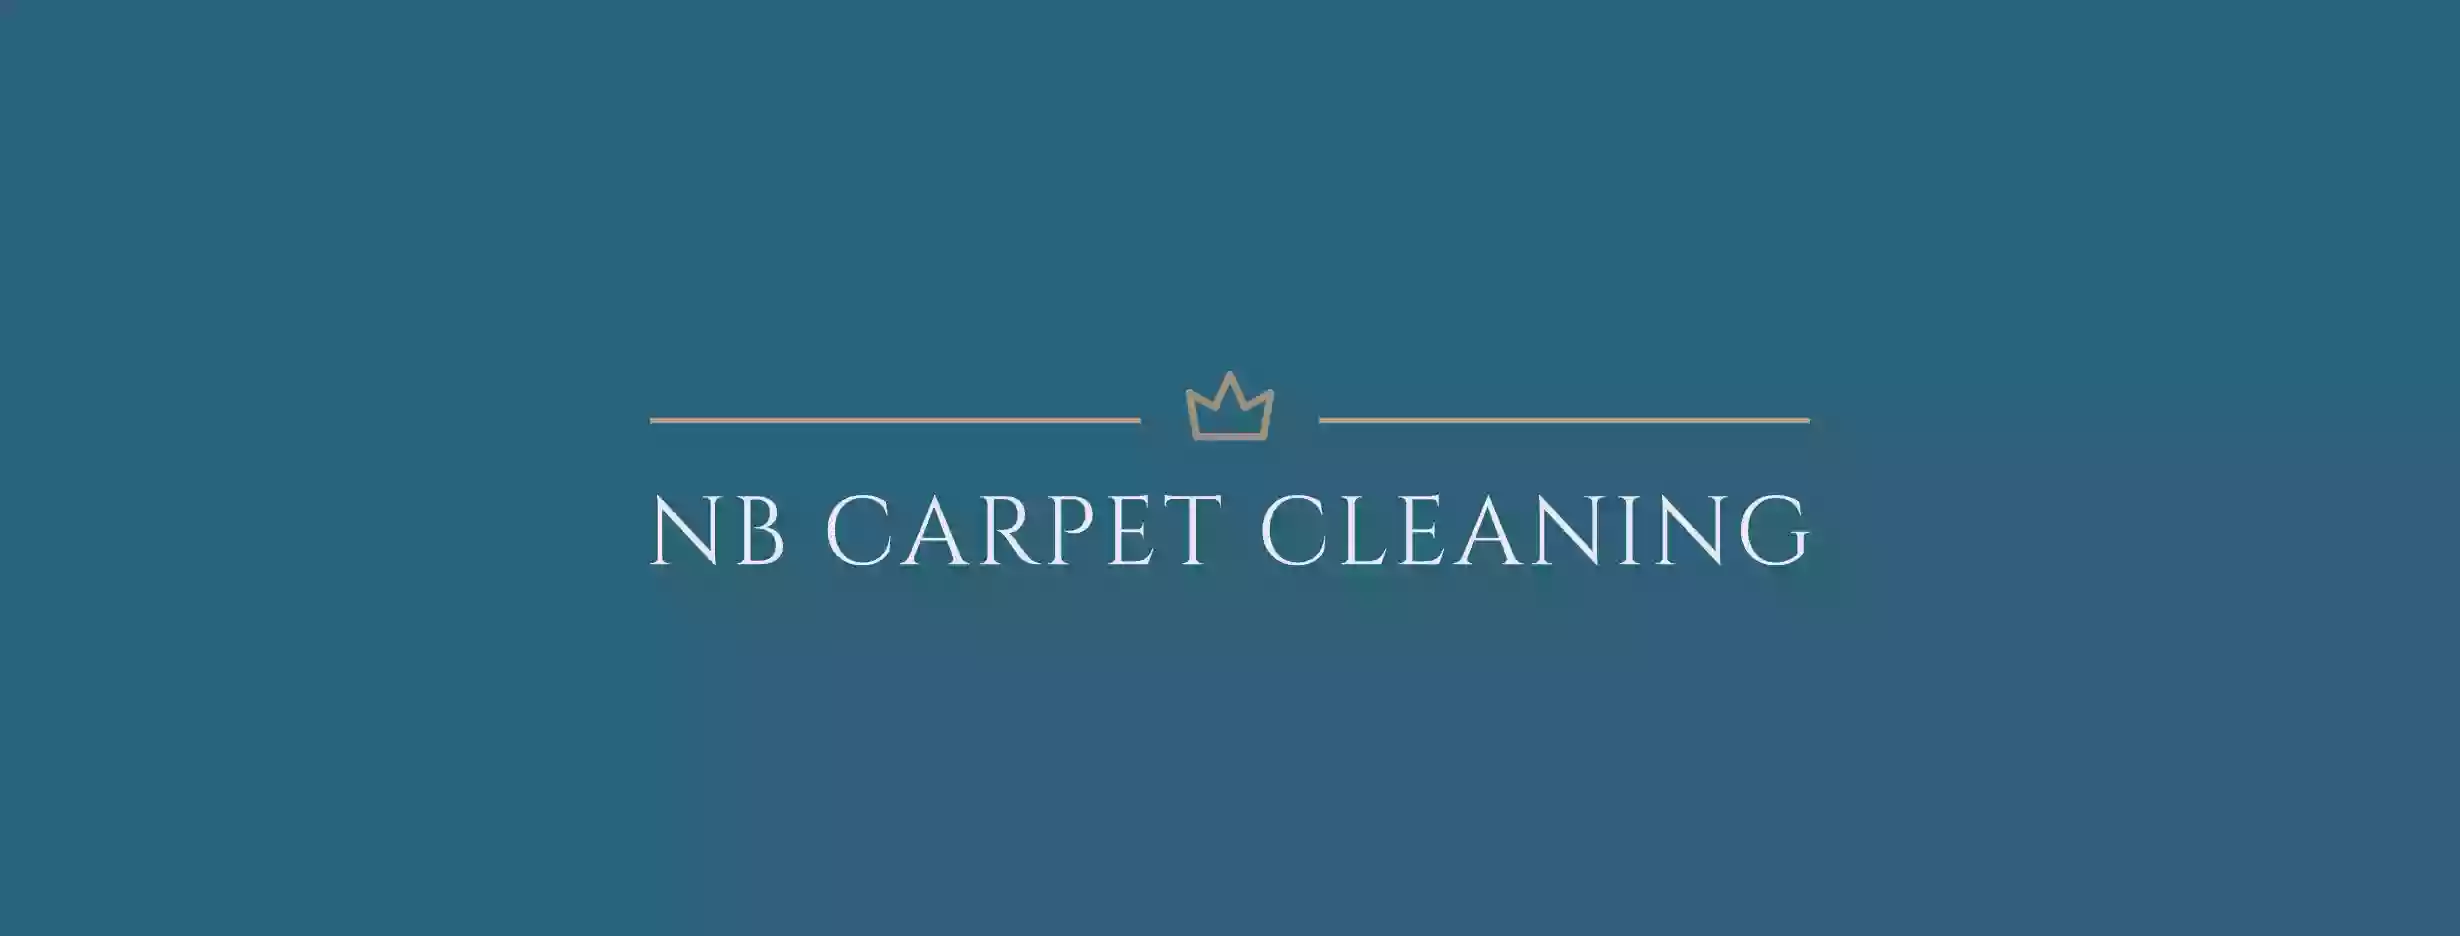 NB Carpet Cleaning